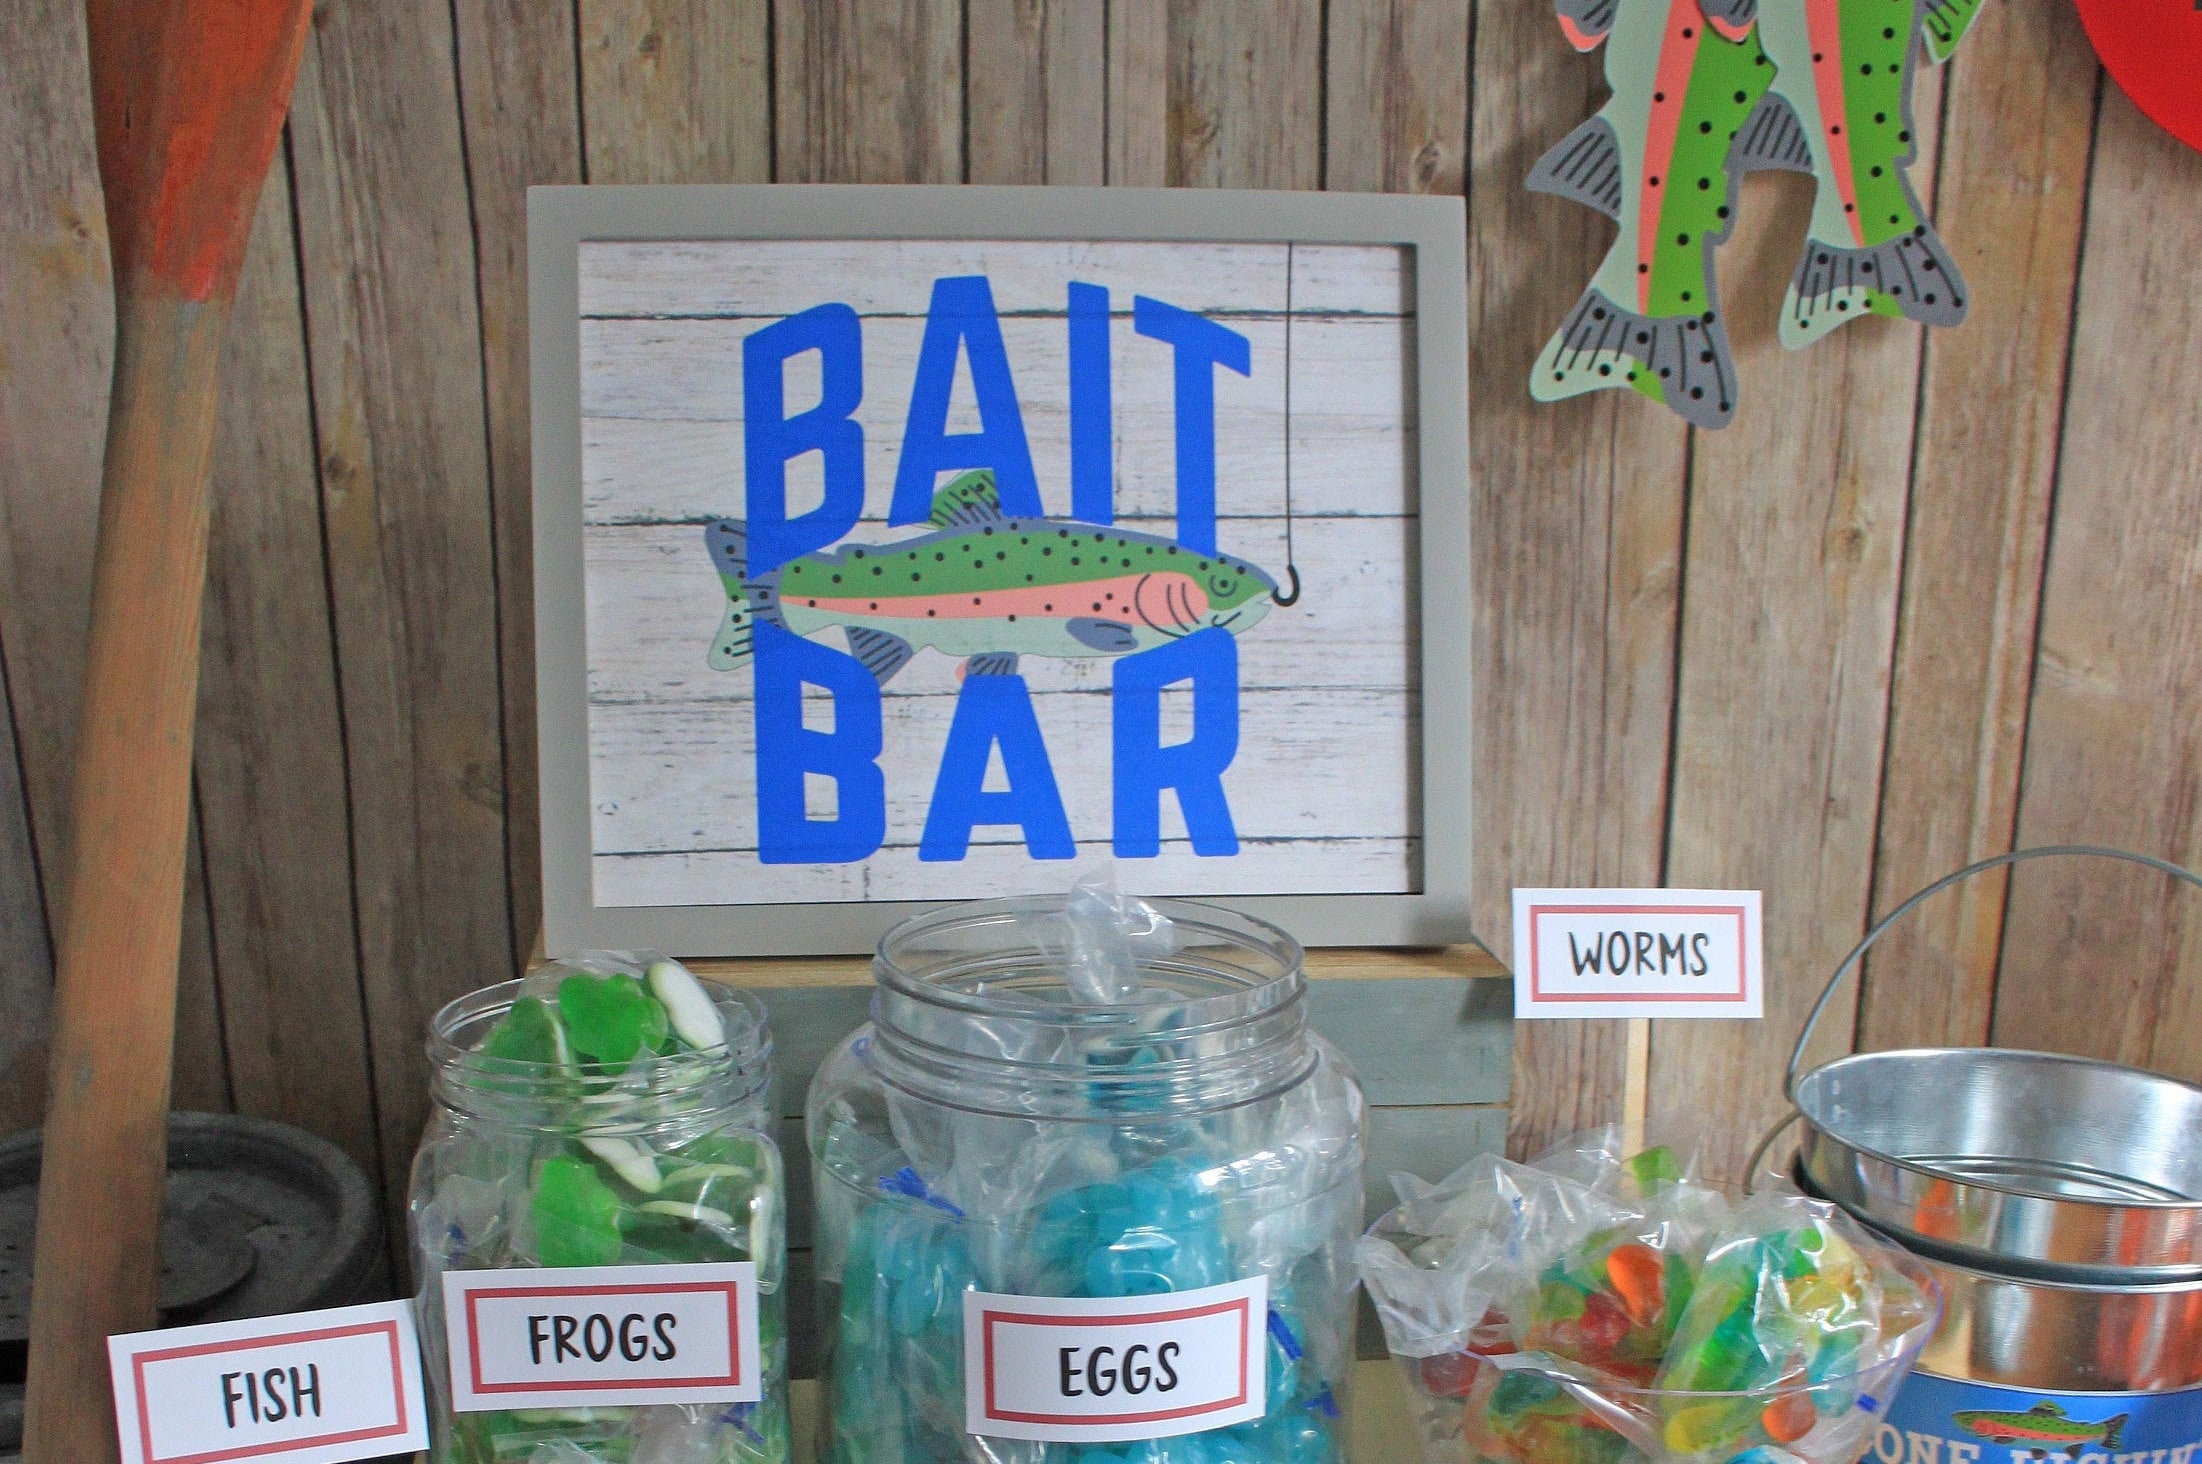 Fishing Theme Party// Bait Bar Sign -  Canada